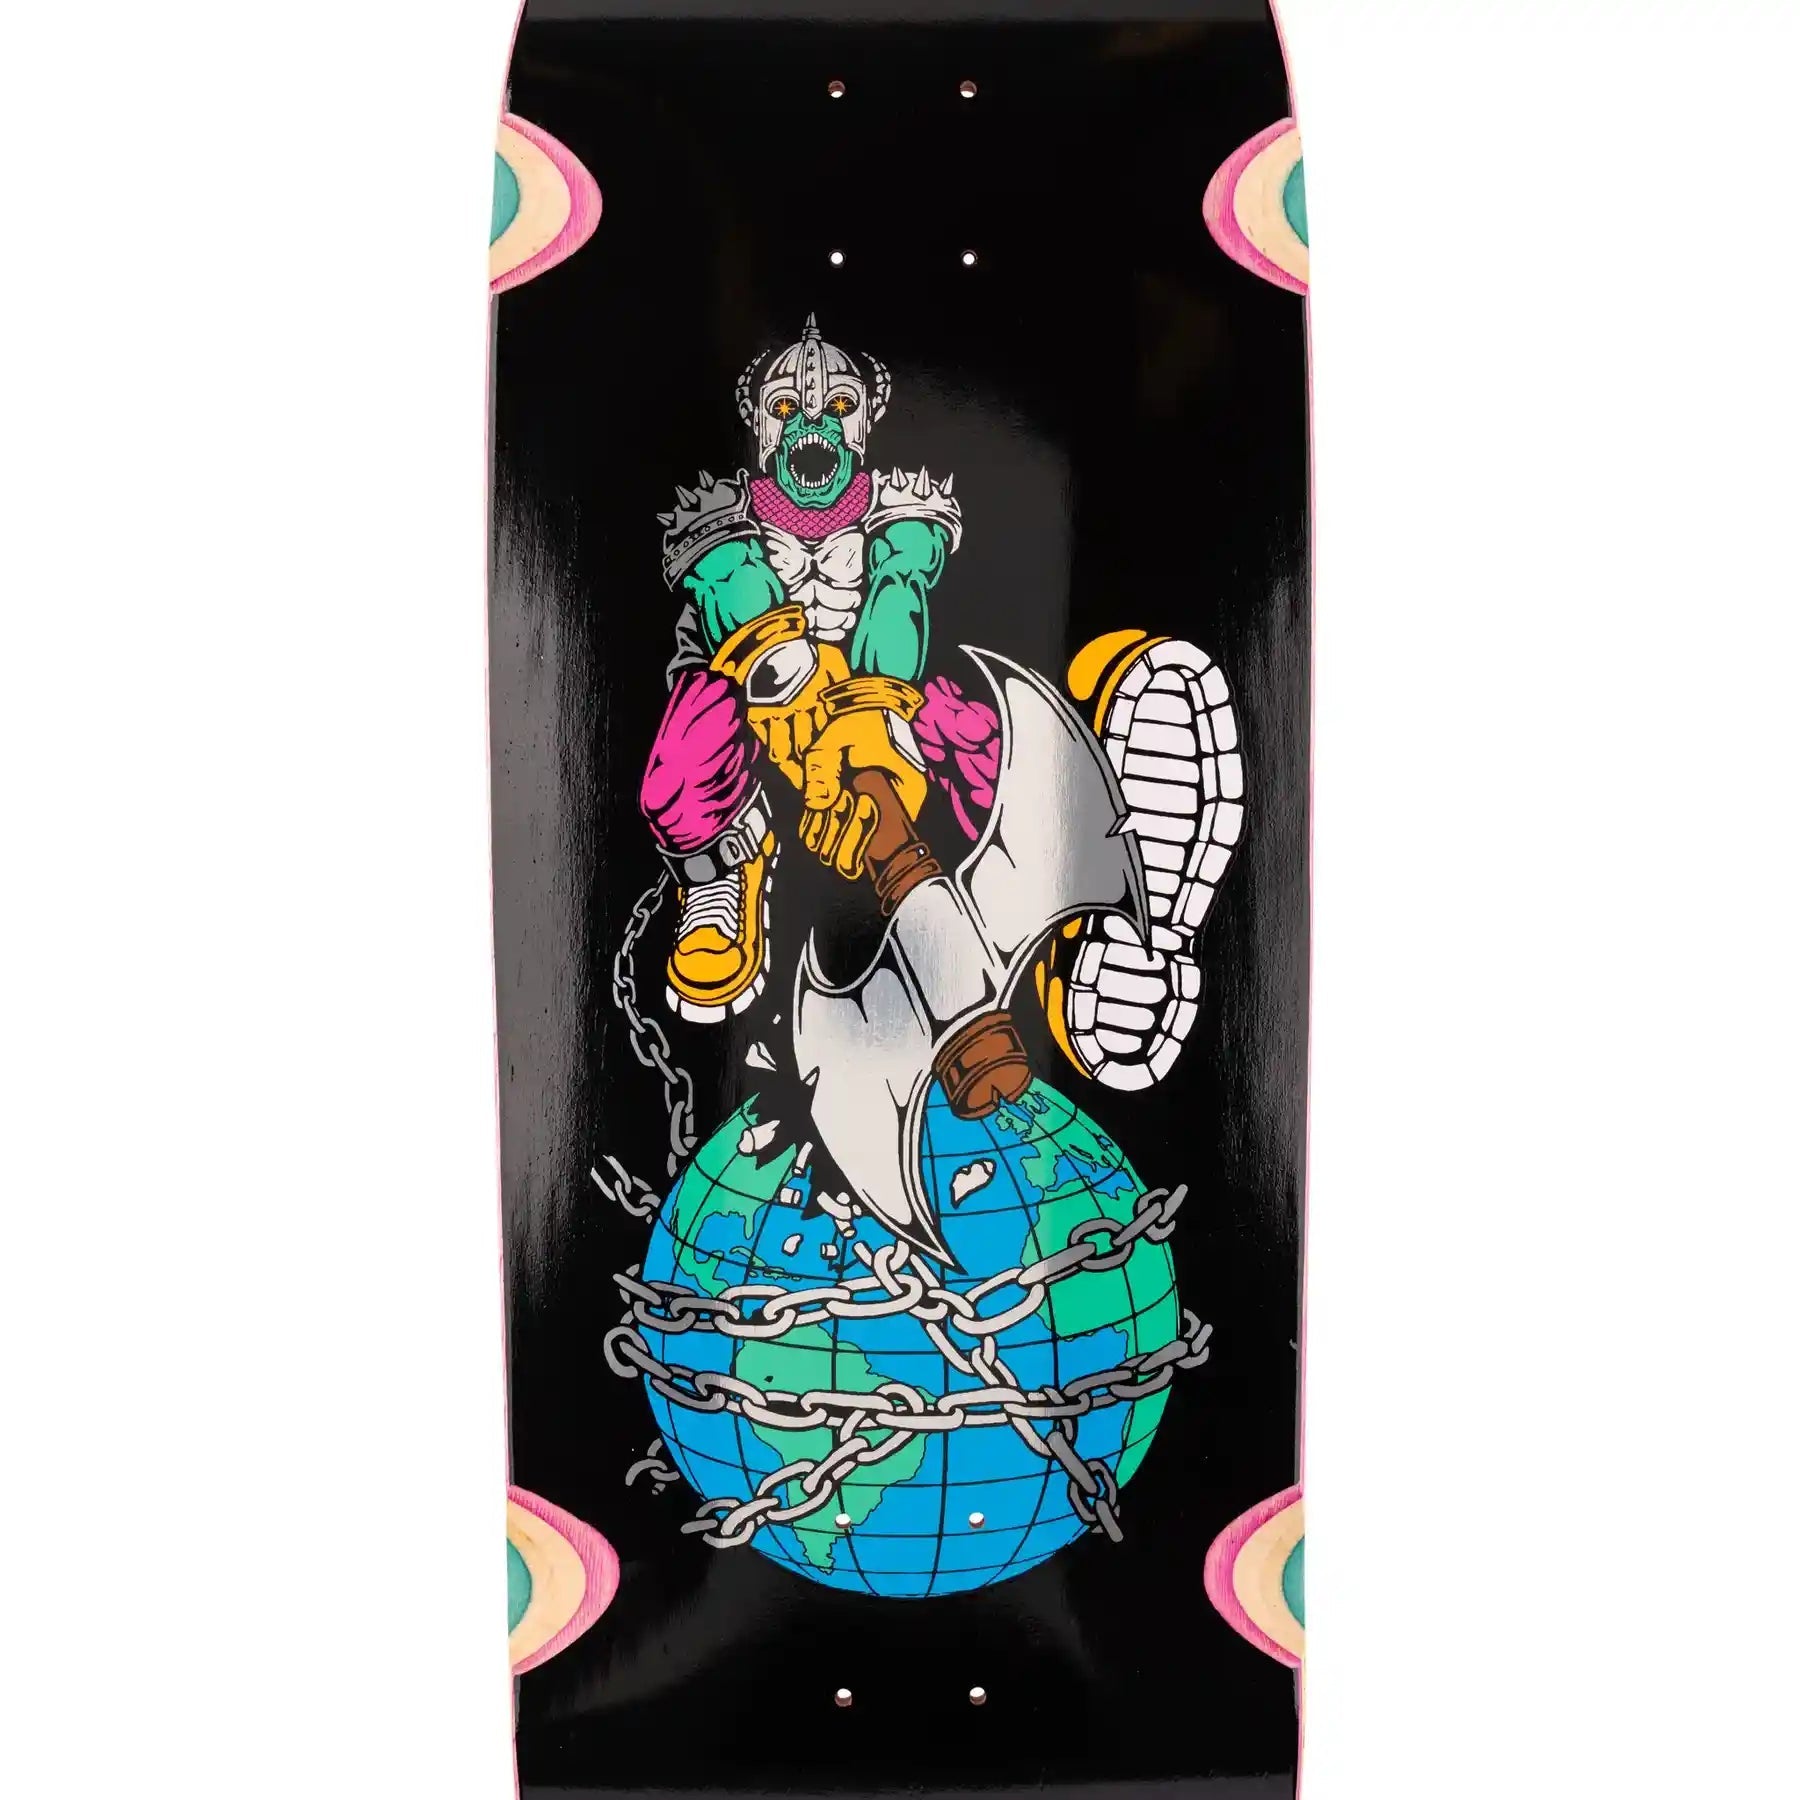 Welcome Unchained Deck (10.5") - Tiki Room Skateboards - 3